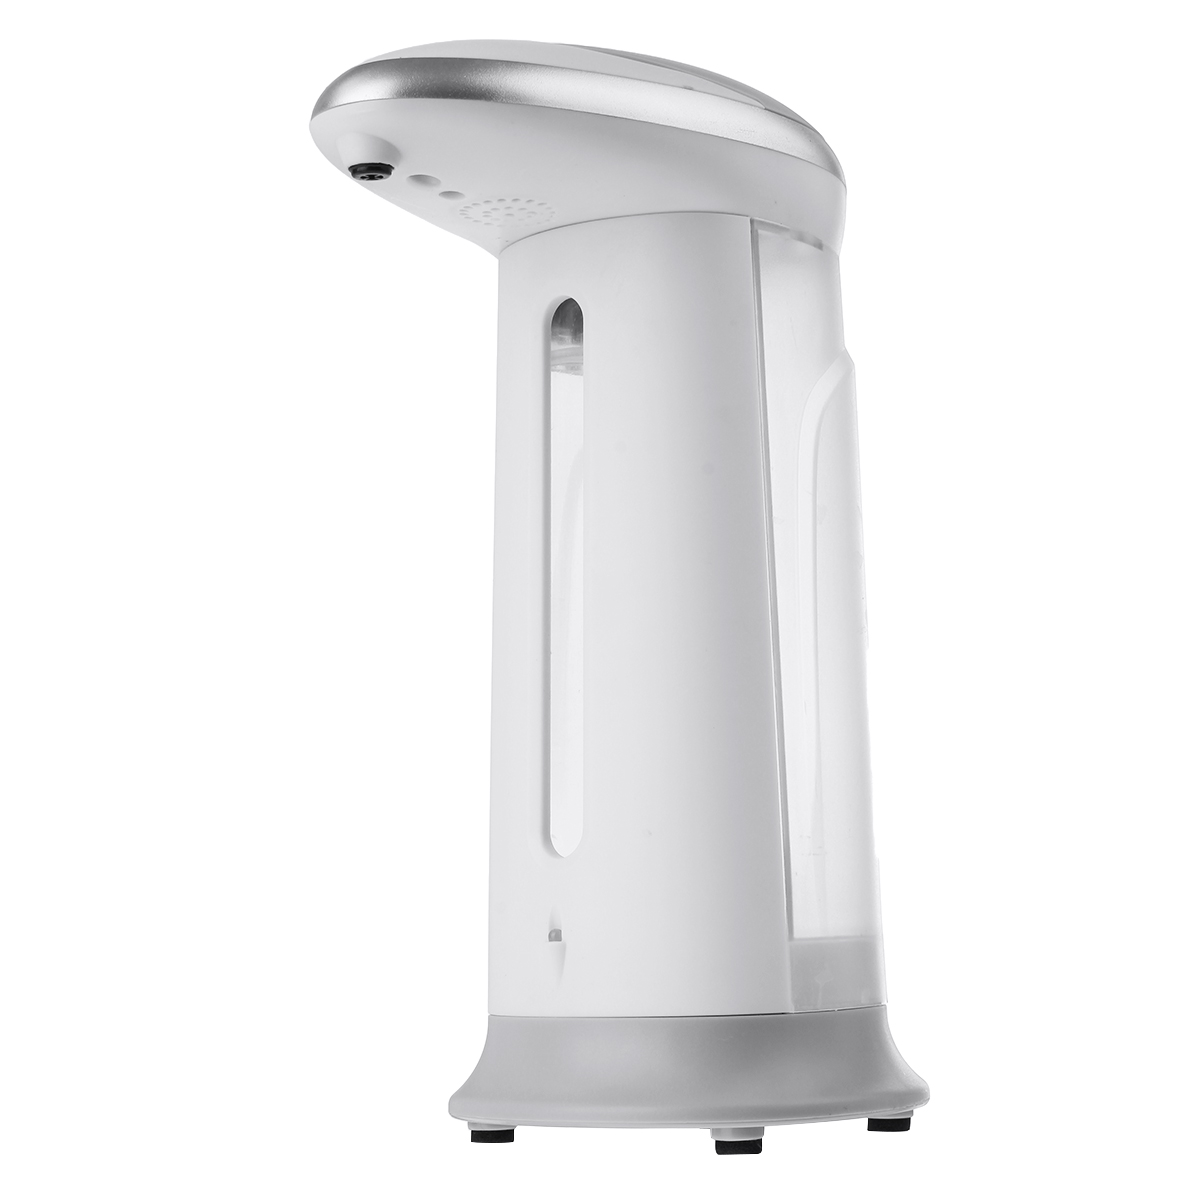 Soap-Dispenser-Automatic-Lotion-Dispenser-Infrared-Sensor-Automatic-No-Touch-1690580-7